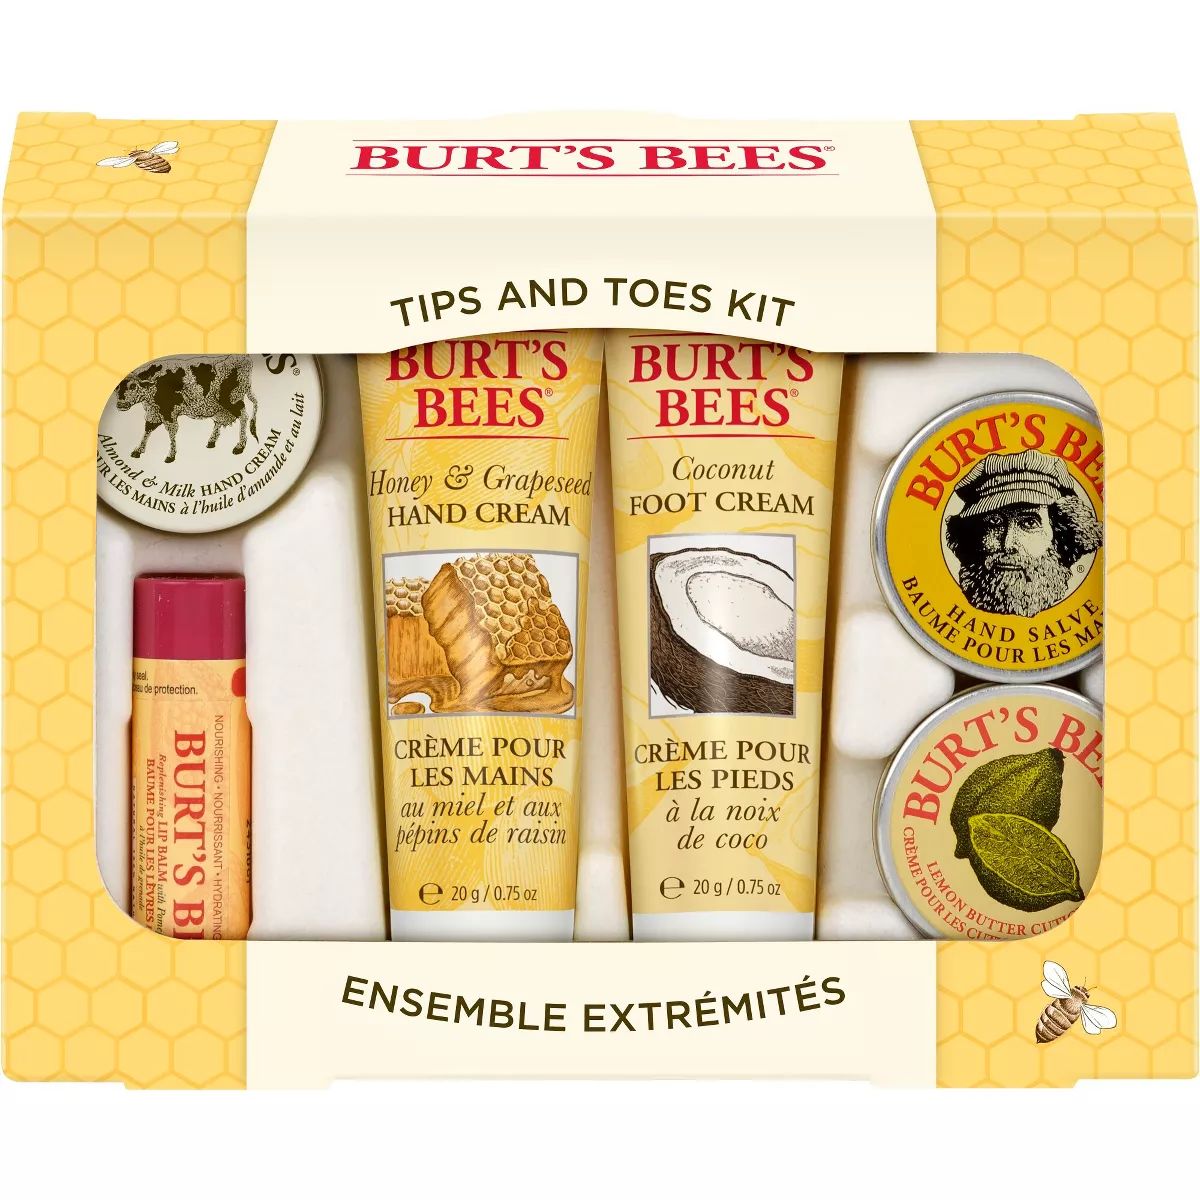 Burt's Bees Tips and Toes Kit - 6ct | Target